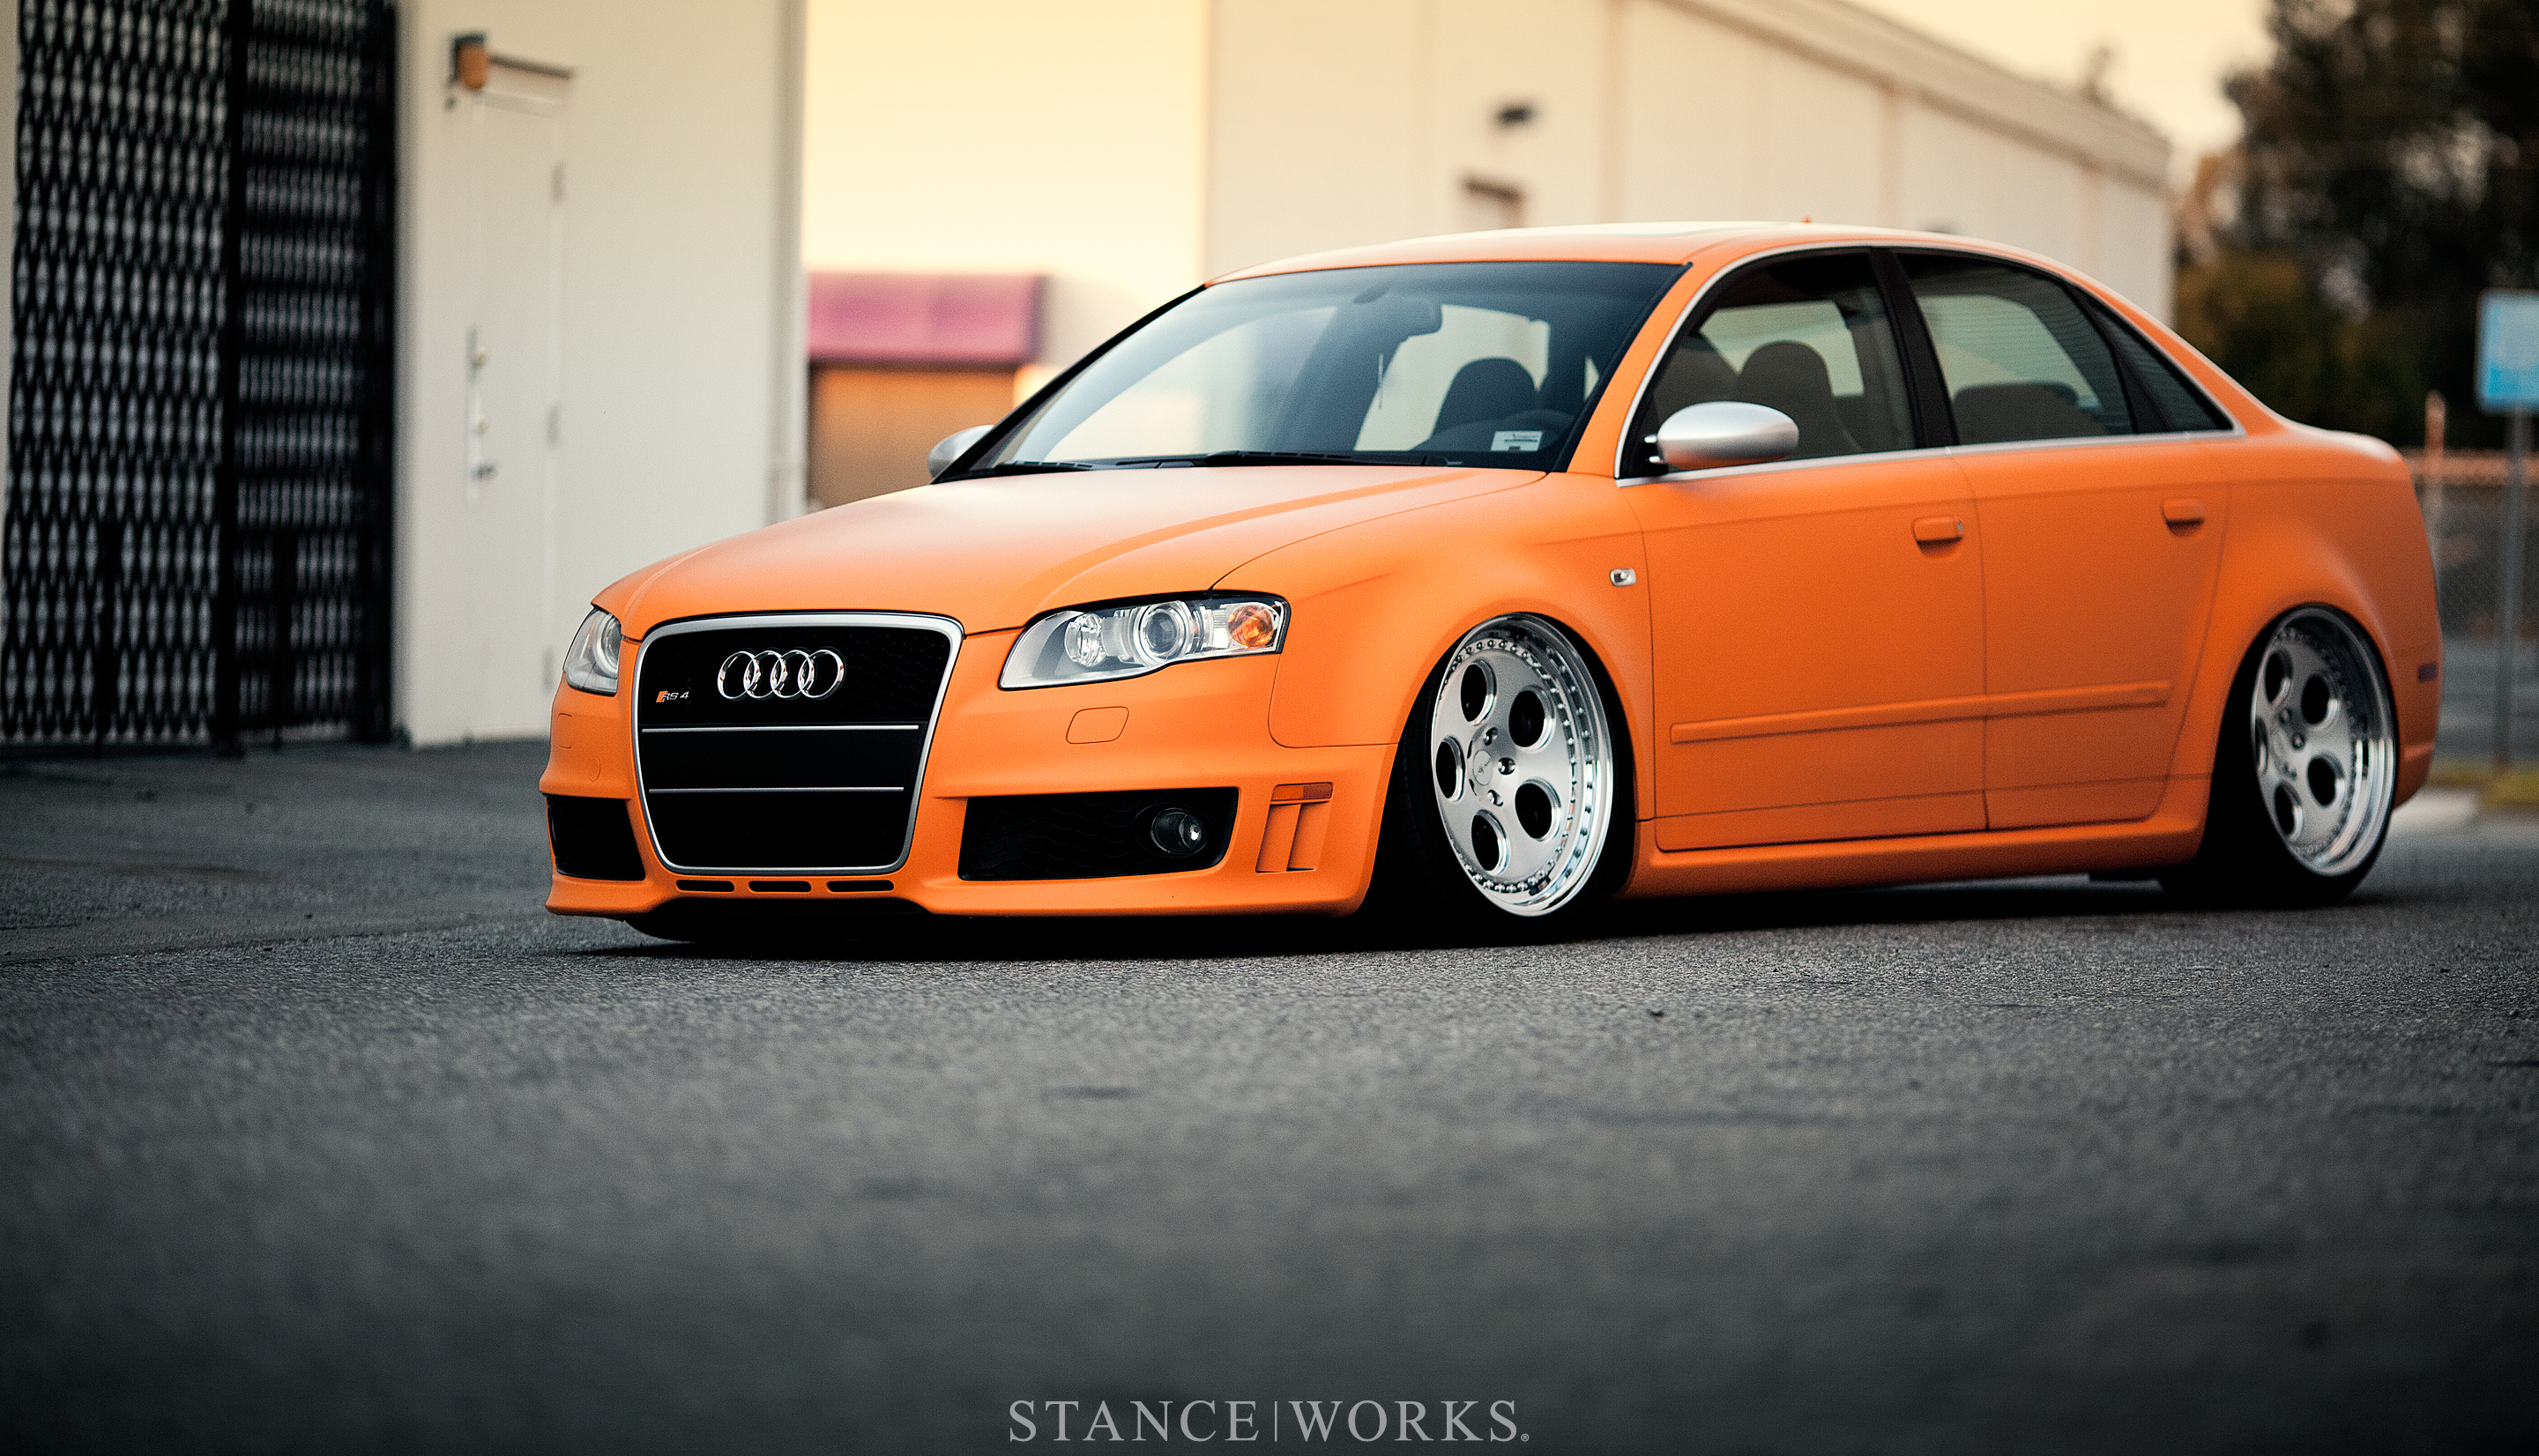 Stanceworks Wallpaper The Rotiform Rs4 Stance Works